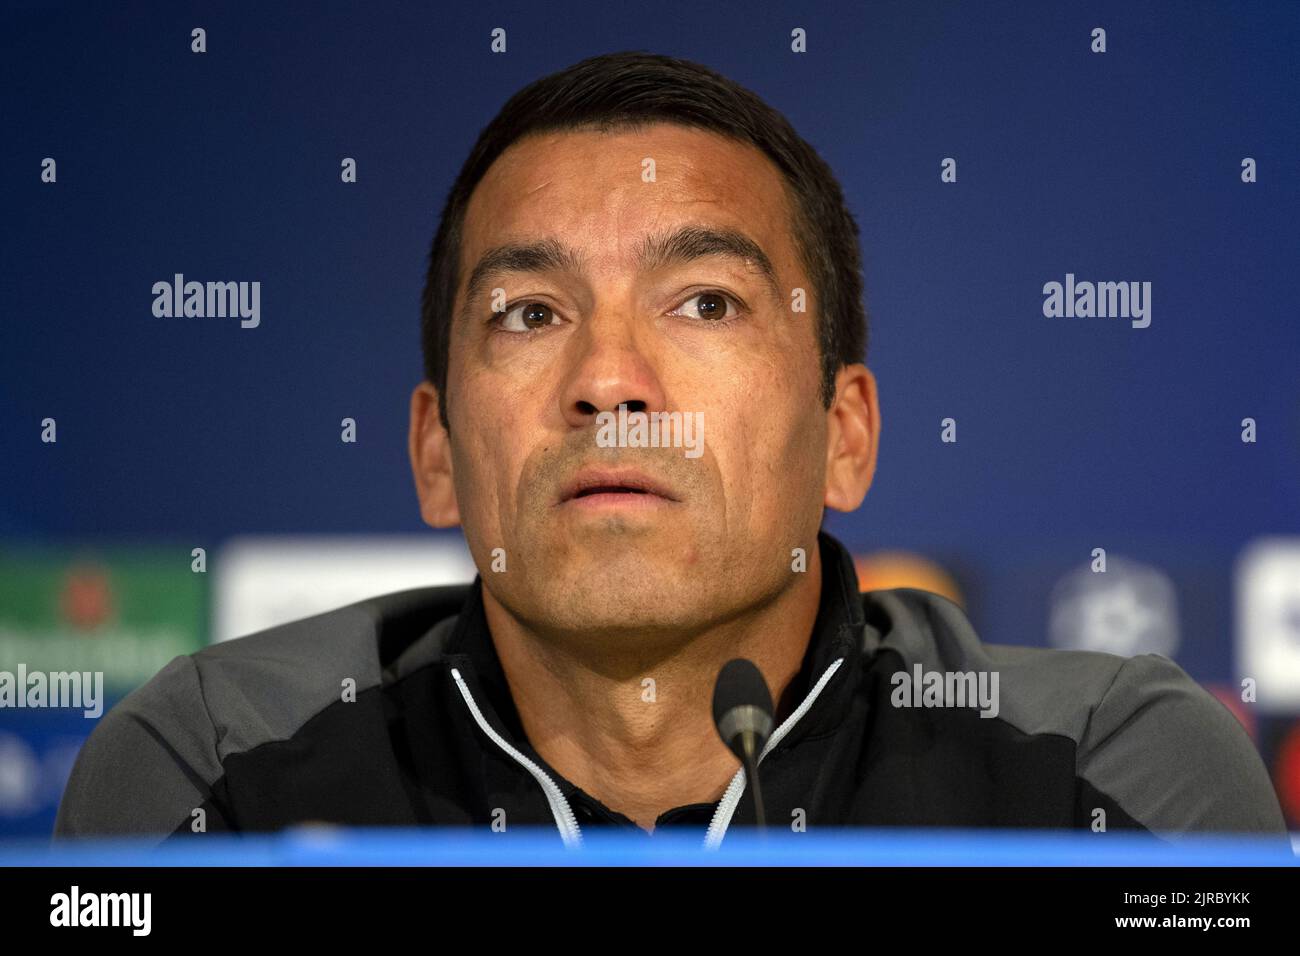 2022-08-23 18:21:15 23-08-2022. Rangers FC trainer Giovanni van Bronckhorst addresses the press in Eindhoven, the Netherlands, in the run-up to the match against PSV. PSV and Rangers compete in Eindhoven for a place in the group stage of the Champions League. ANP OLAF KRAAK netherlands out - belgium out Stock Photo